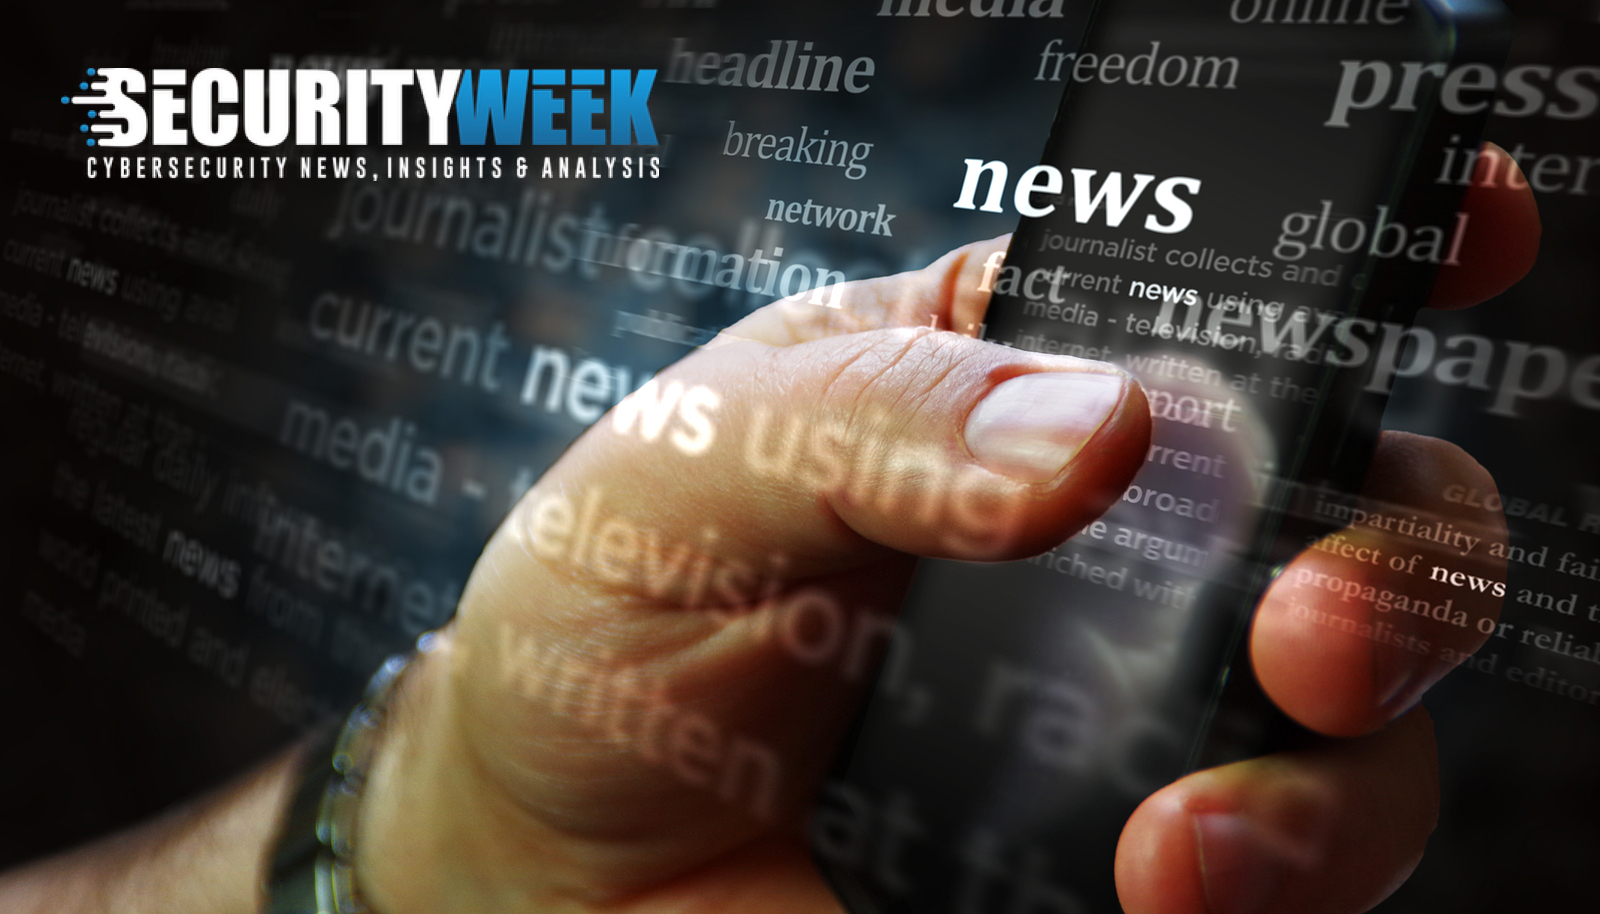 In Other News: Military Emails Leaked, Google Restricts Internet Access, Chinese Spyware – Source: www.securityweek.com